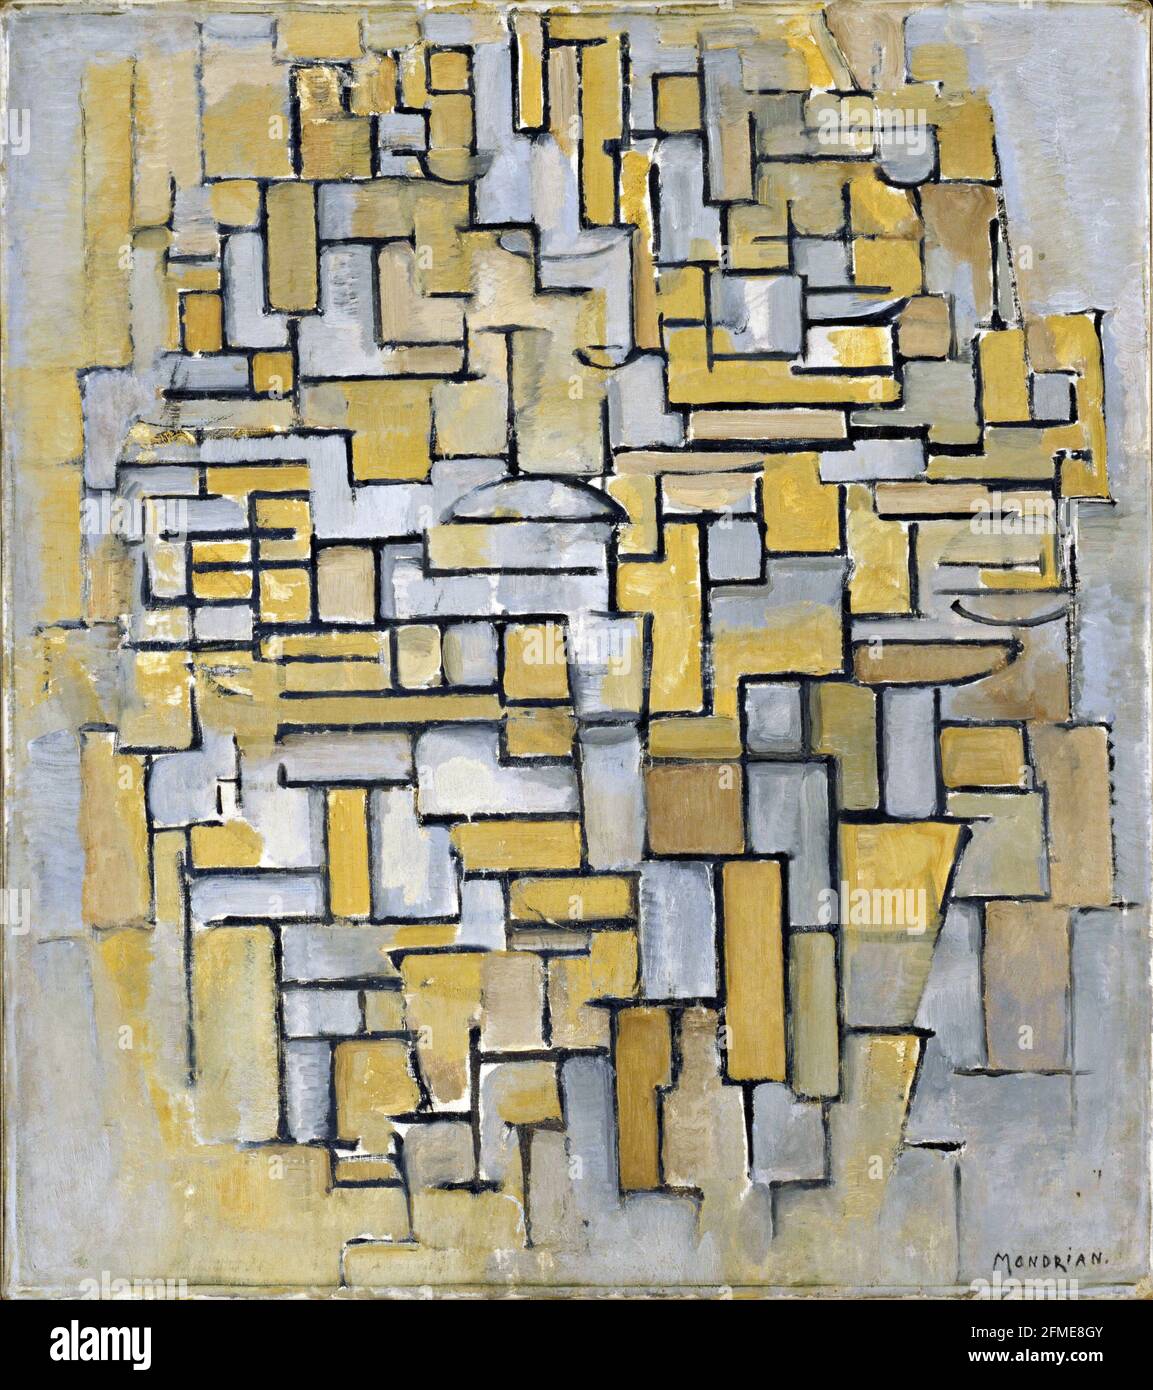 Piet Mondrian. (Dutch, 1872-1944). Composition in Brown and Gray (Gemälde no. II / Composition no. IX / Compositie 5). 1913. Oil on canvas. Stock Photo